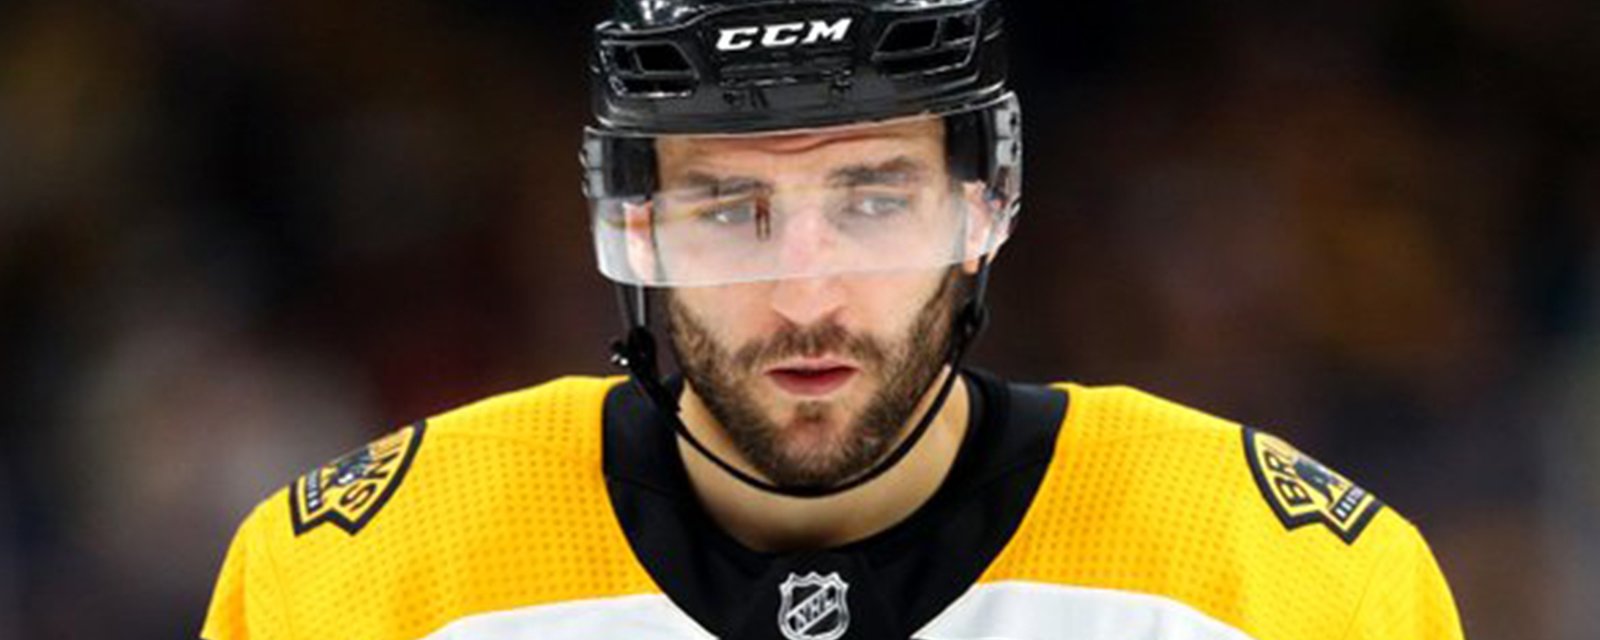 Injury Update: Things even worse for Bergeron than first feared